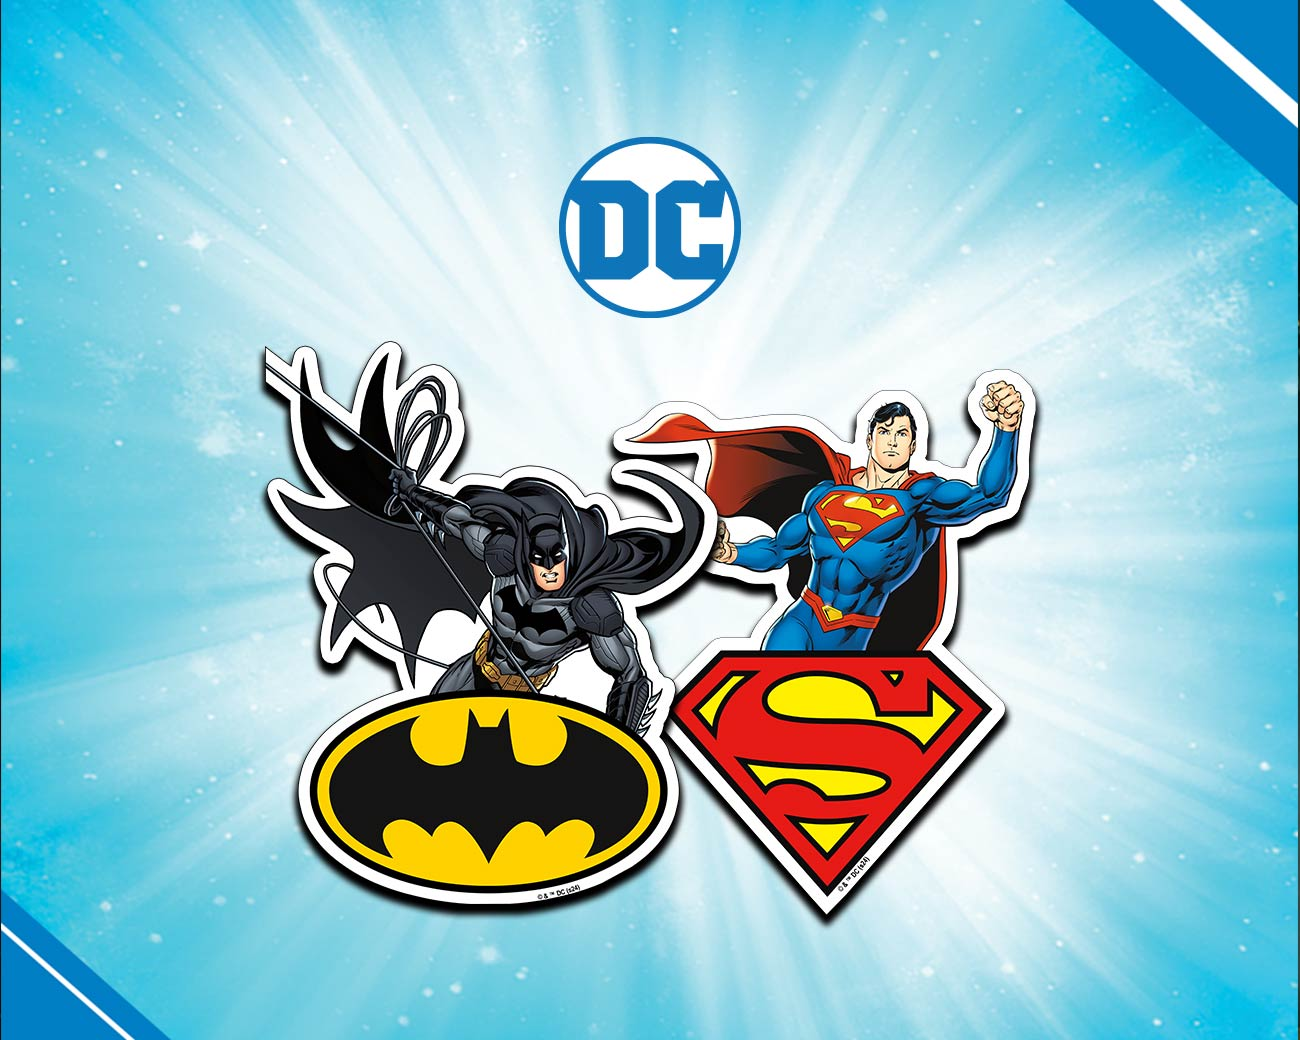 DC Justice League Wooden Jigsaw Puzzles - Officially Licensed